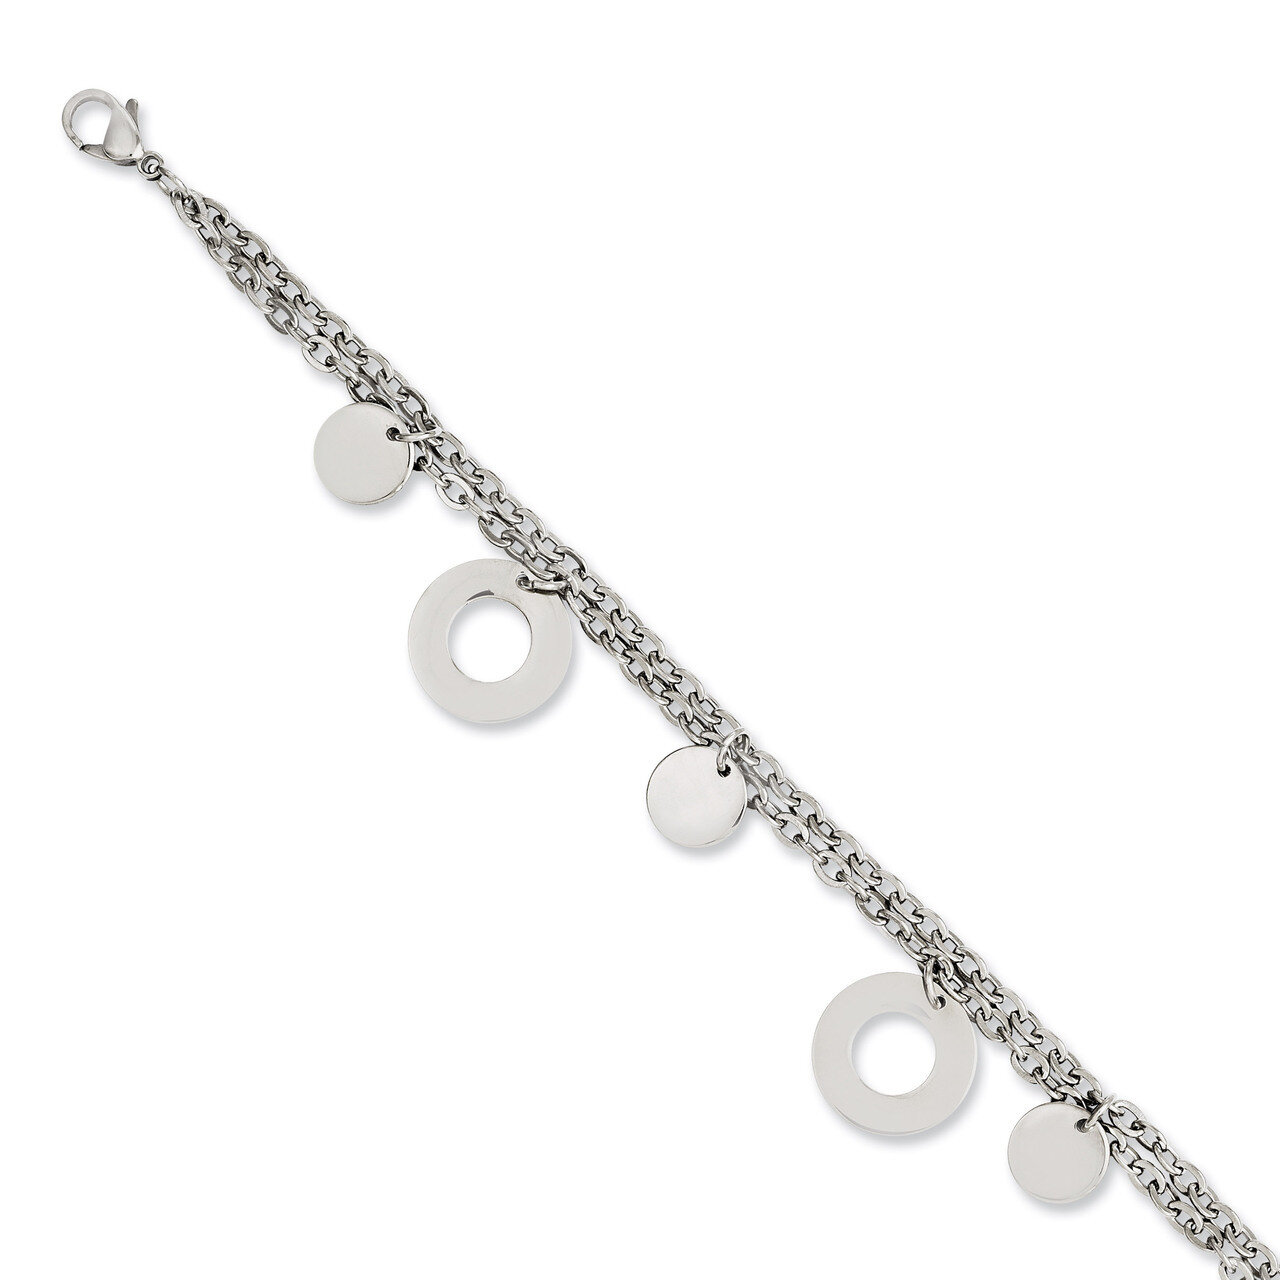 Polished Circles & Discs 7.75 Inch Bracelet - Stainless Steel SRB1021